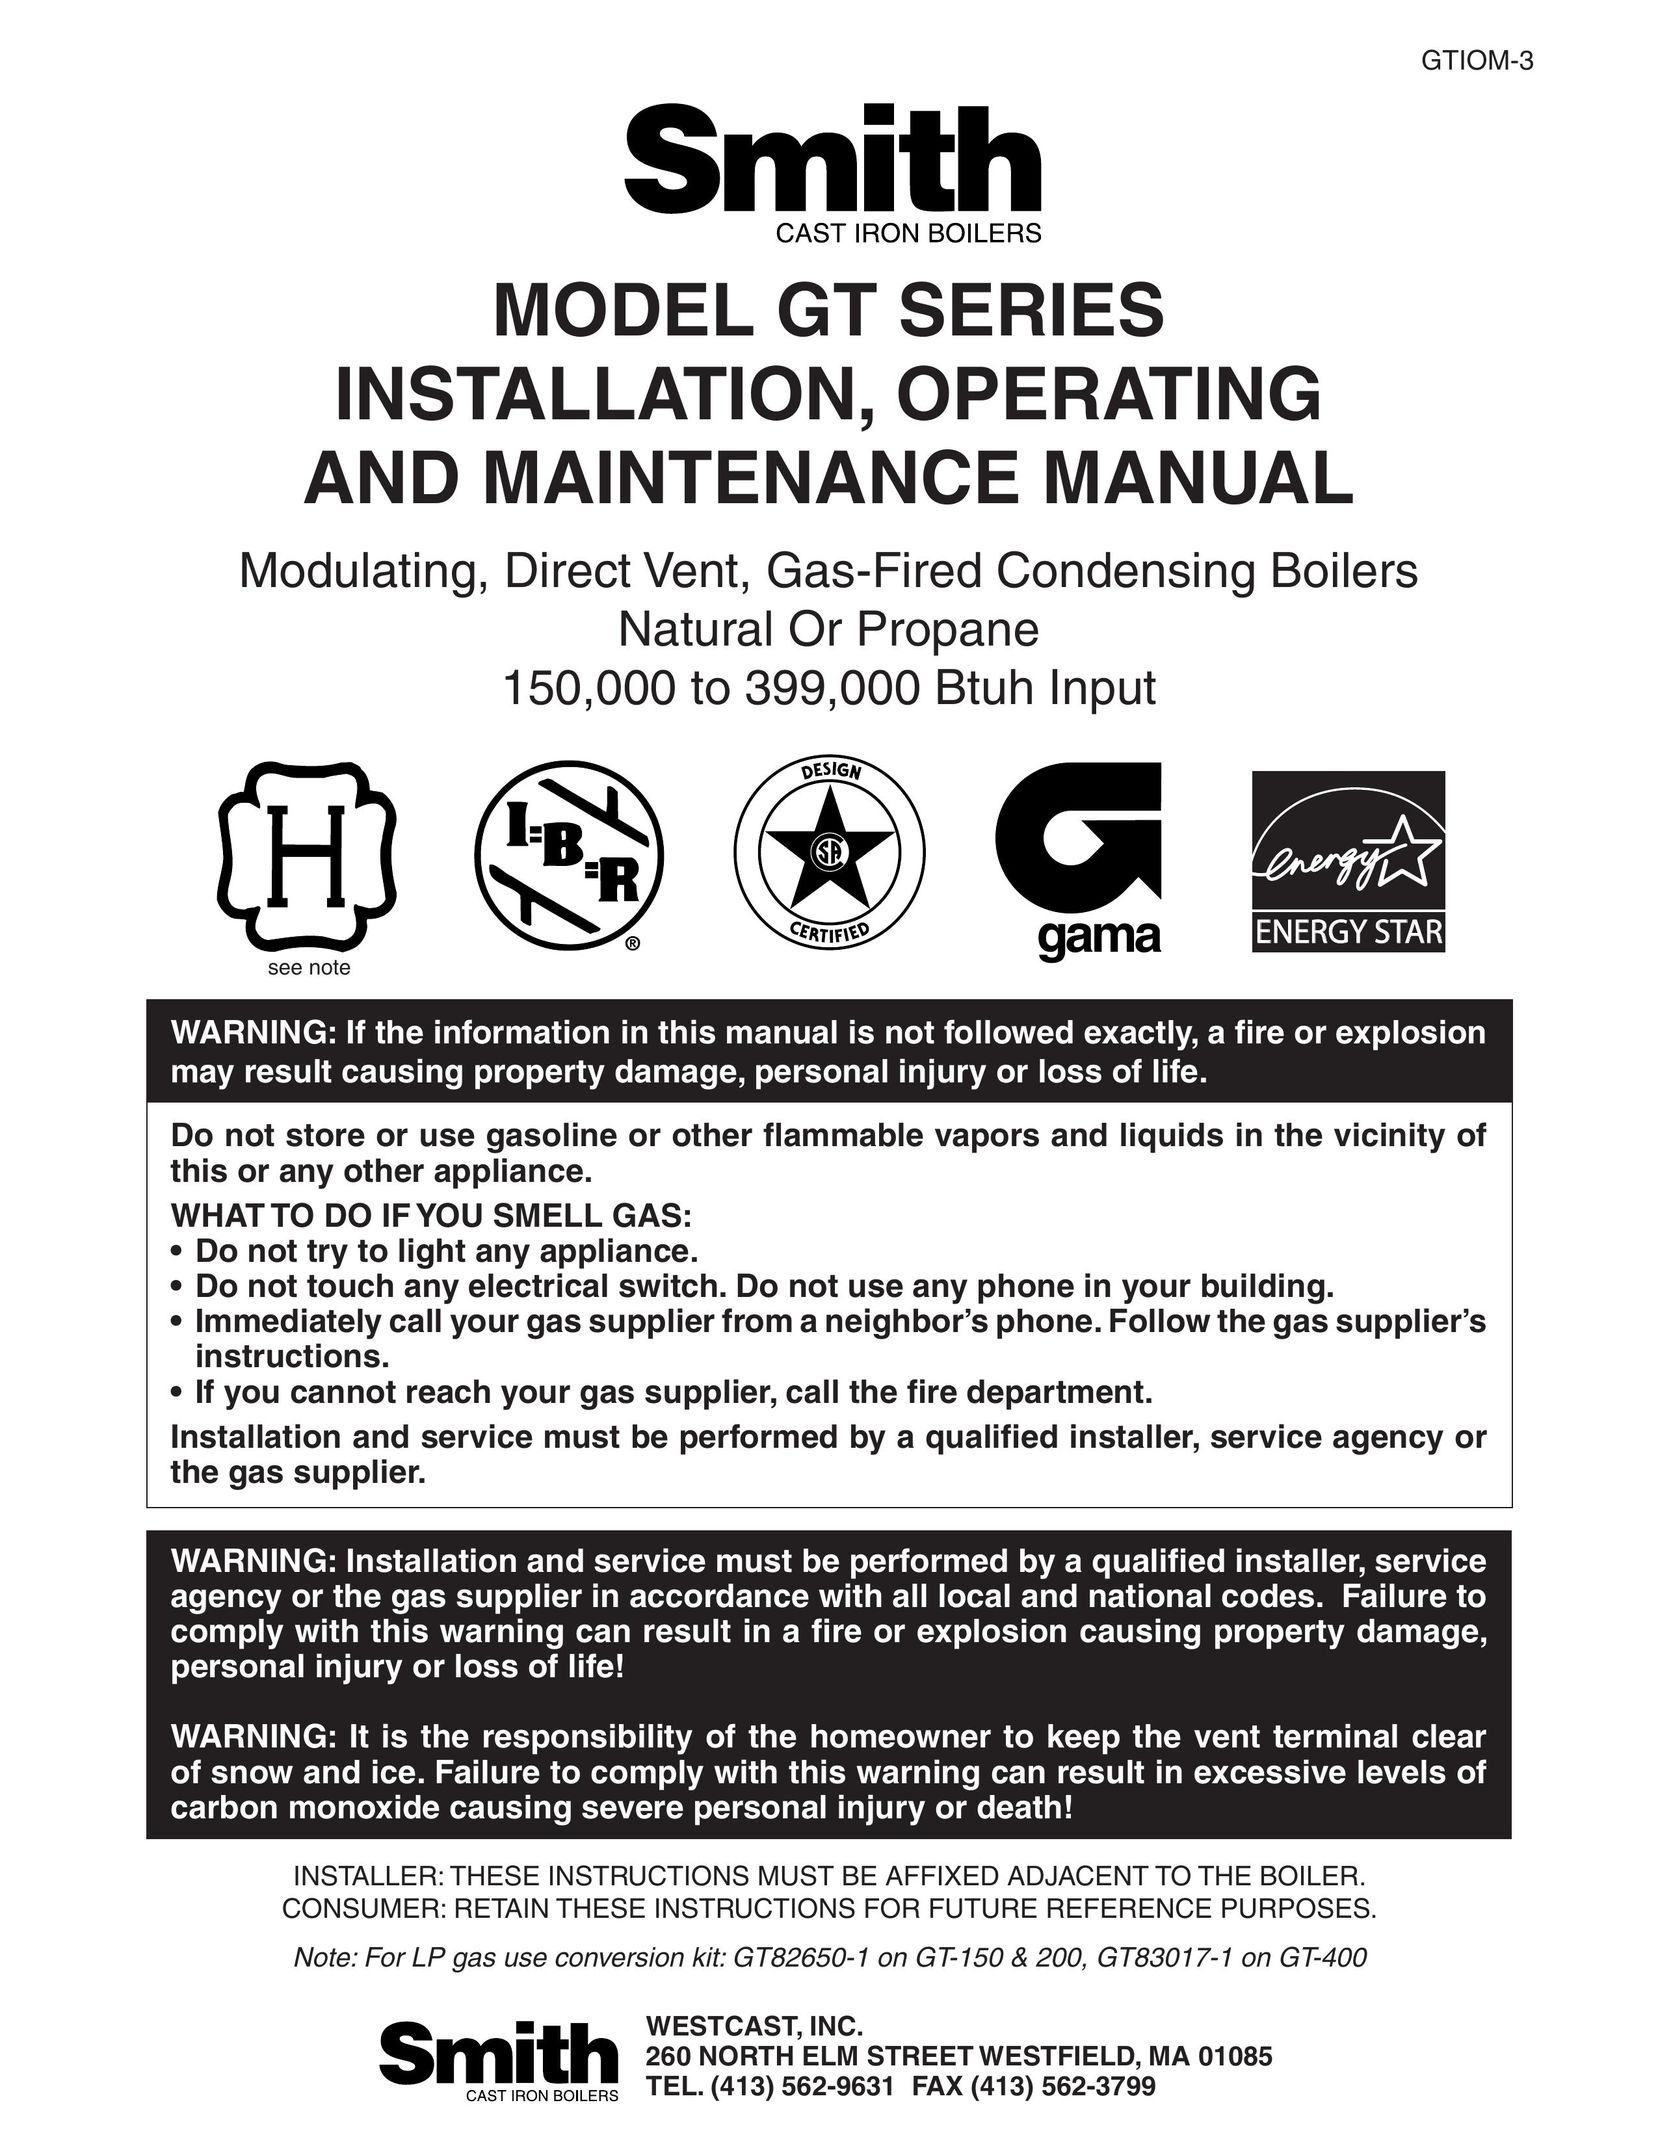 Smith Cast Iron Boilers GT Series Boiler User Manual